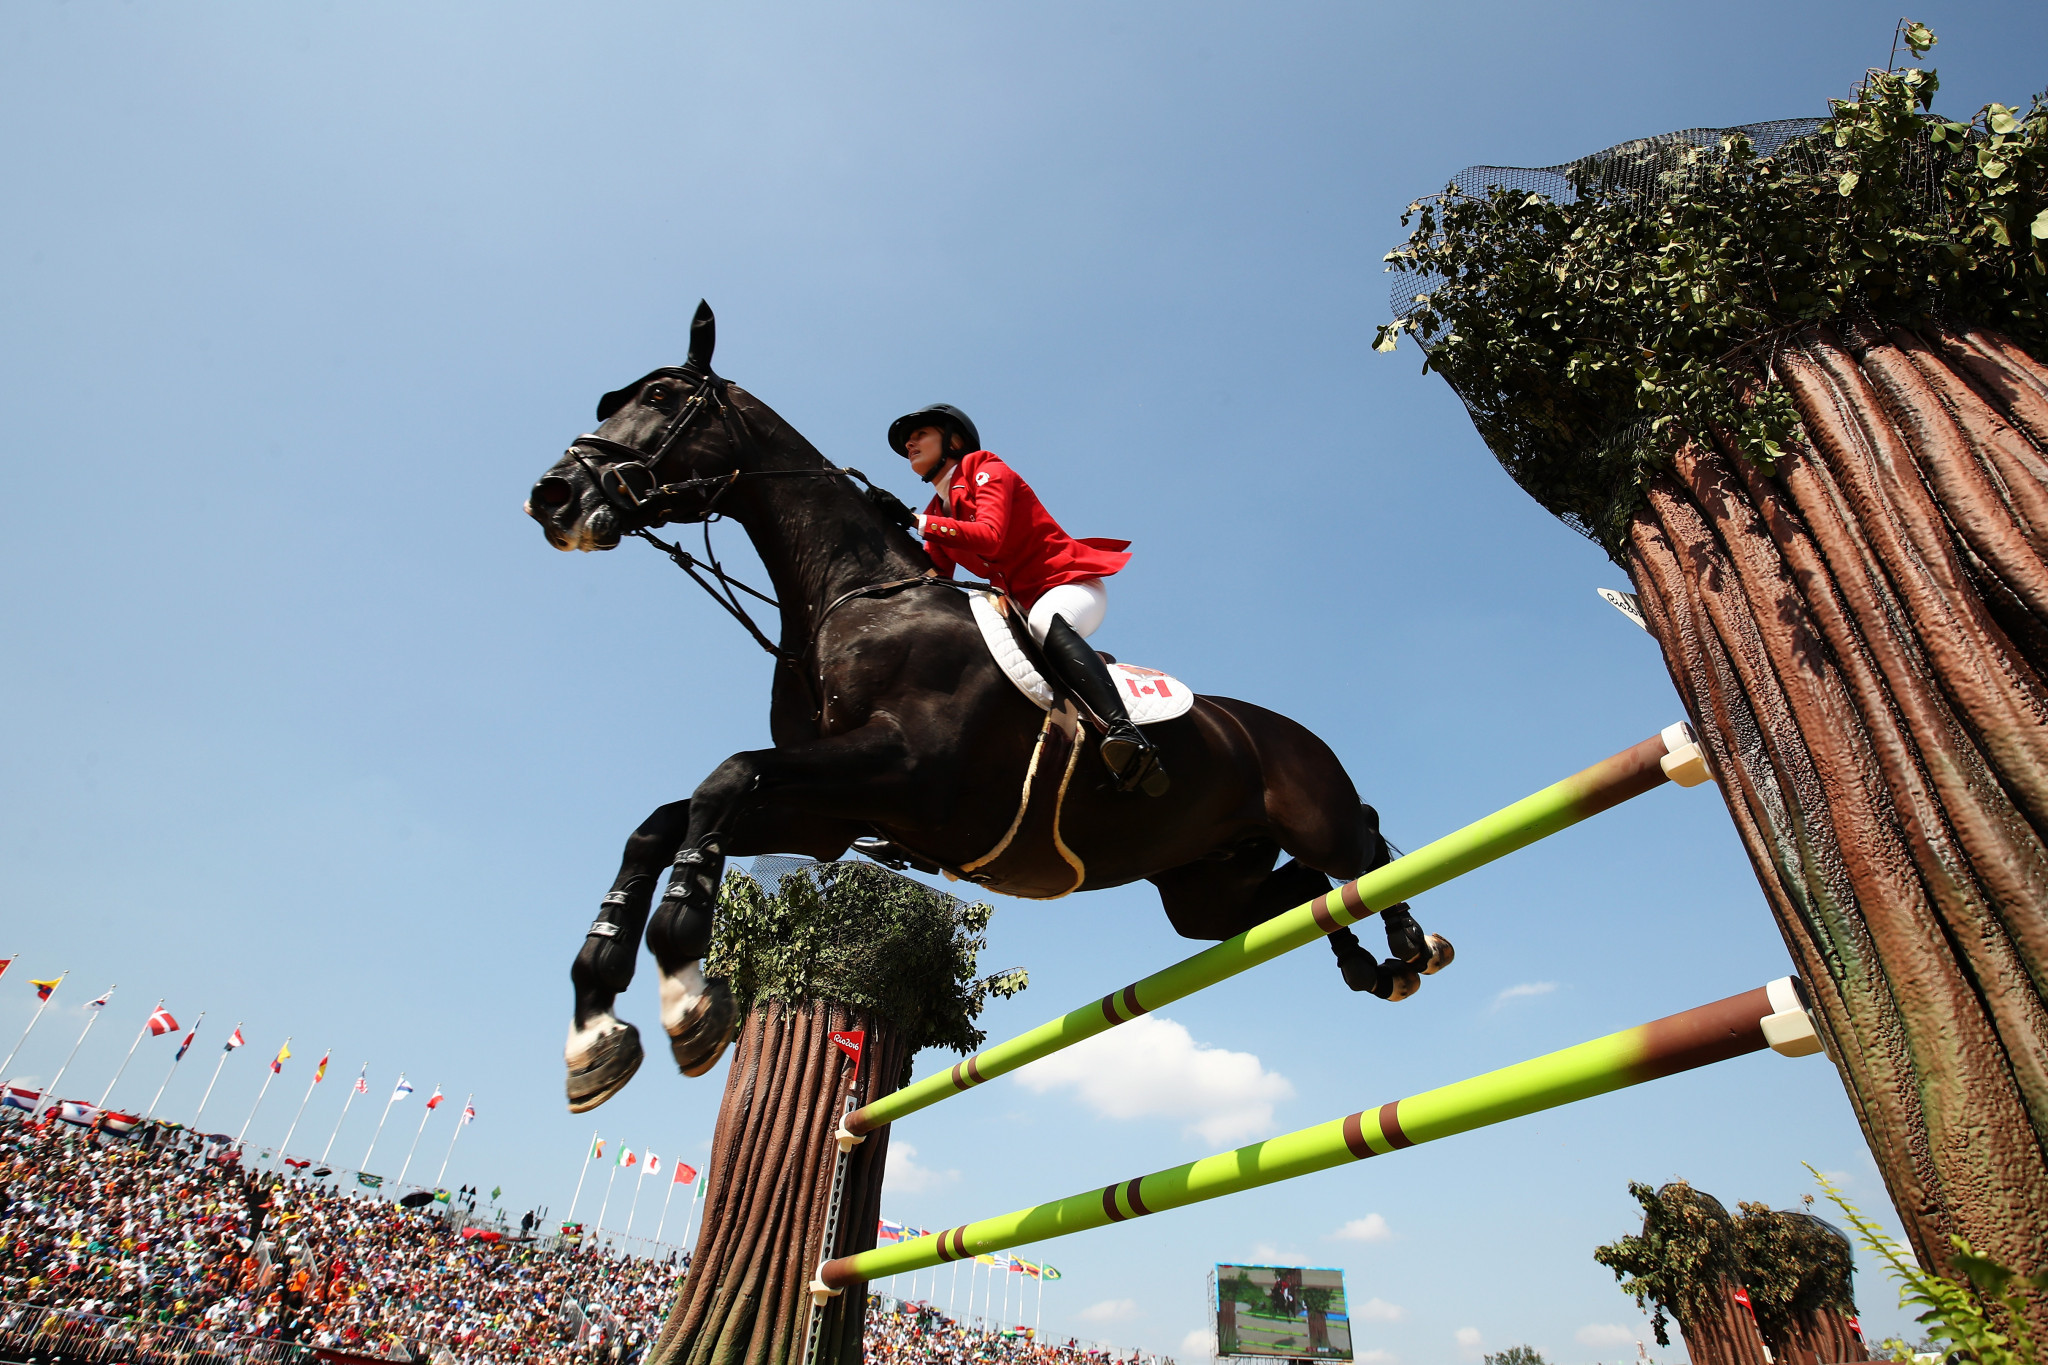 Foster returns to home venue as Langley prepares to host FEI Jumping Nations Cup leg